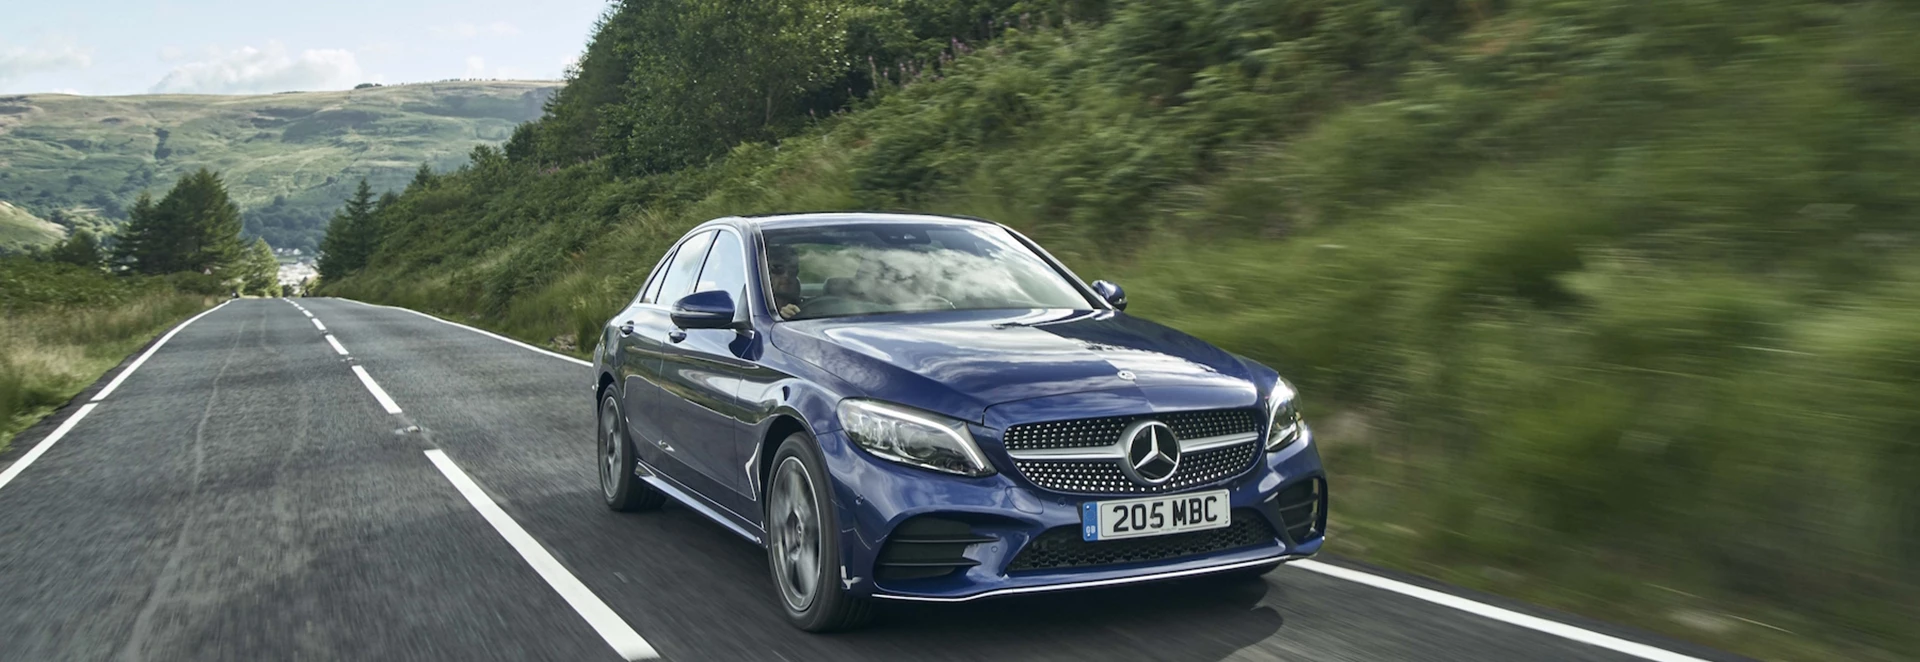 Mercedes-Benz revises trim levels which means cheaper entry-level options